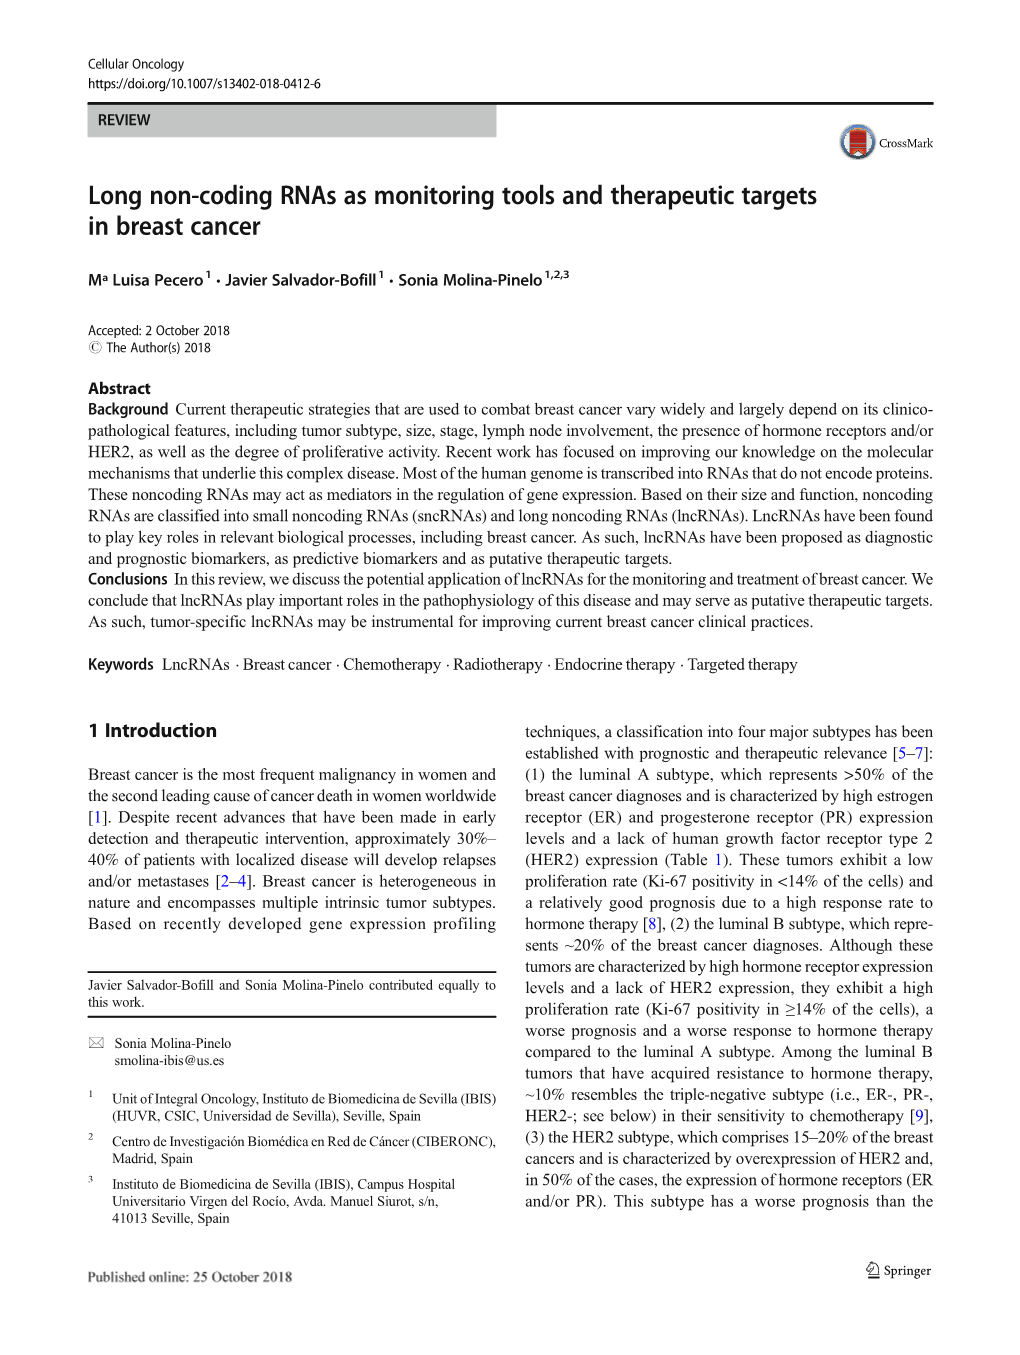 Long Non-Coding Rnas As Monitoring Tools and Therapeutic Targets in Breast Cancer